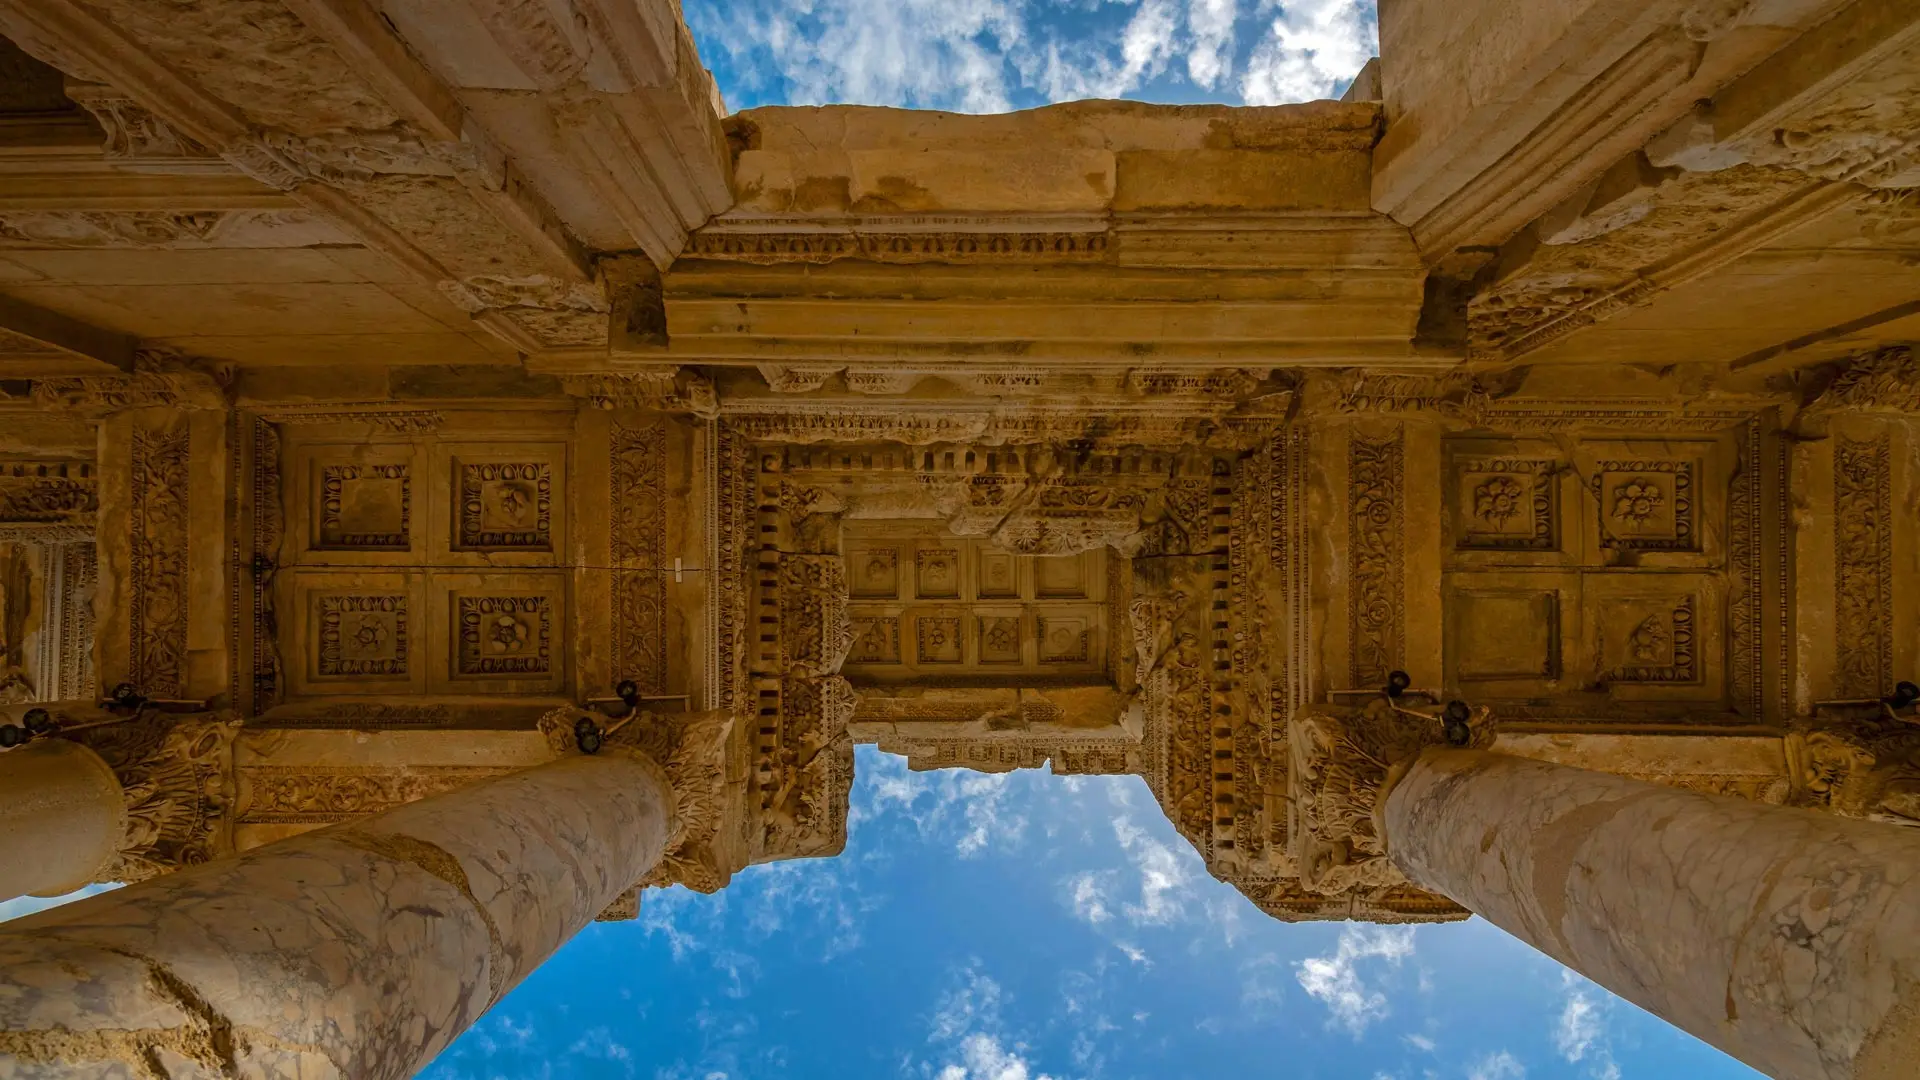 LibraryofCelsus_ZH-CN11719117244_1920x1080.png